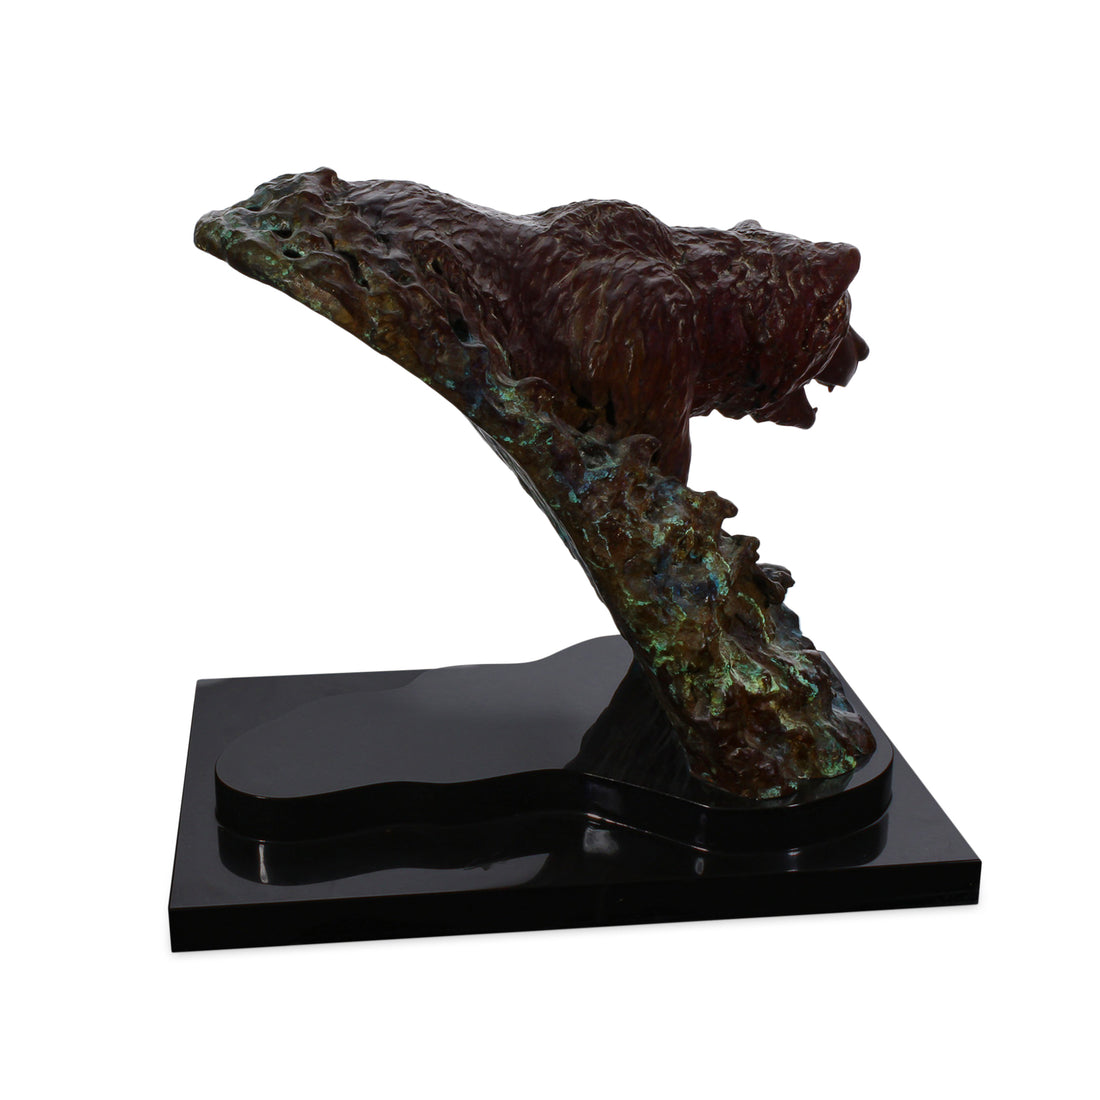 Richard Stanley - "The Long Wait" - Bronze Sculpture with Polished Stone Base